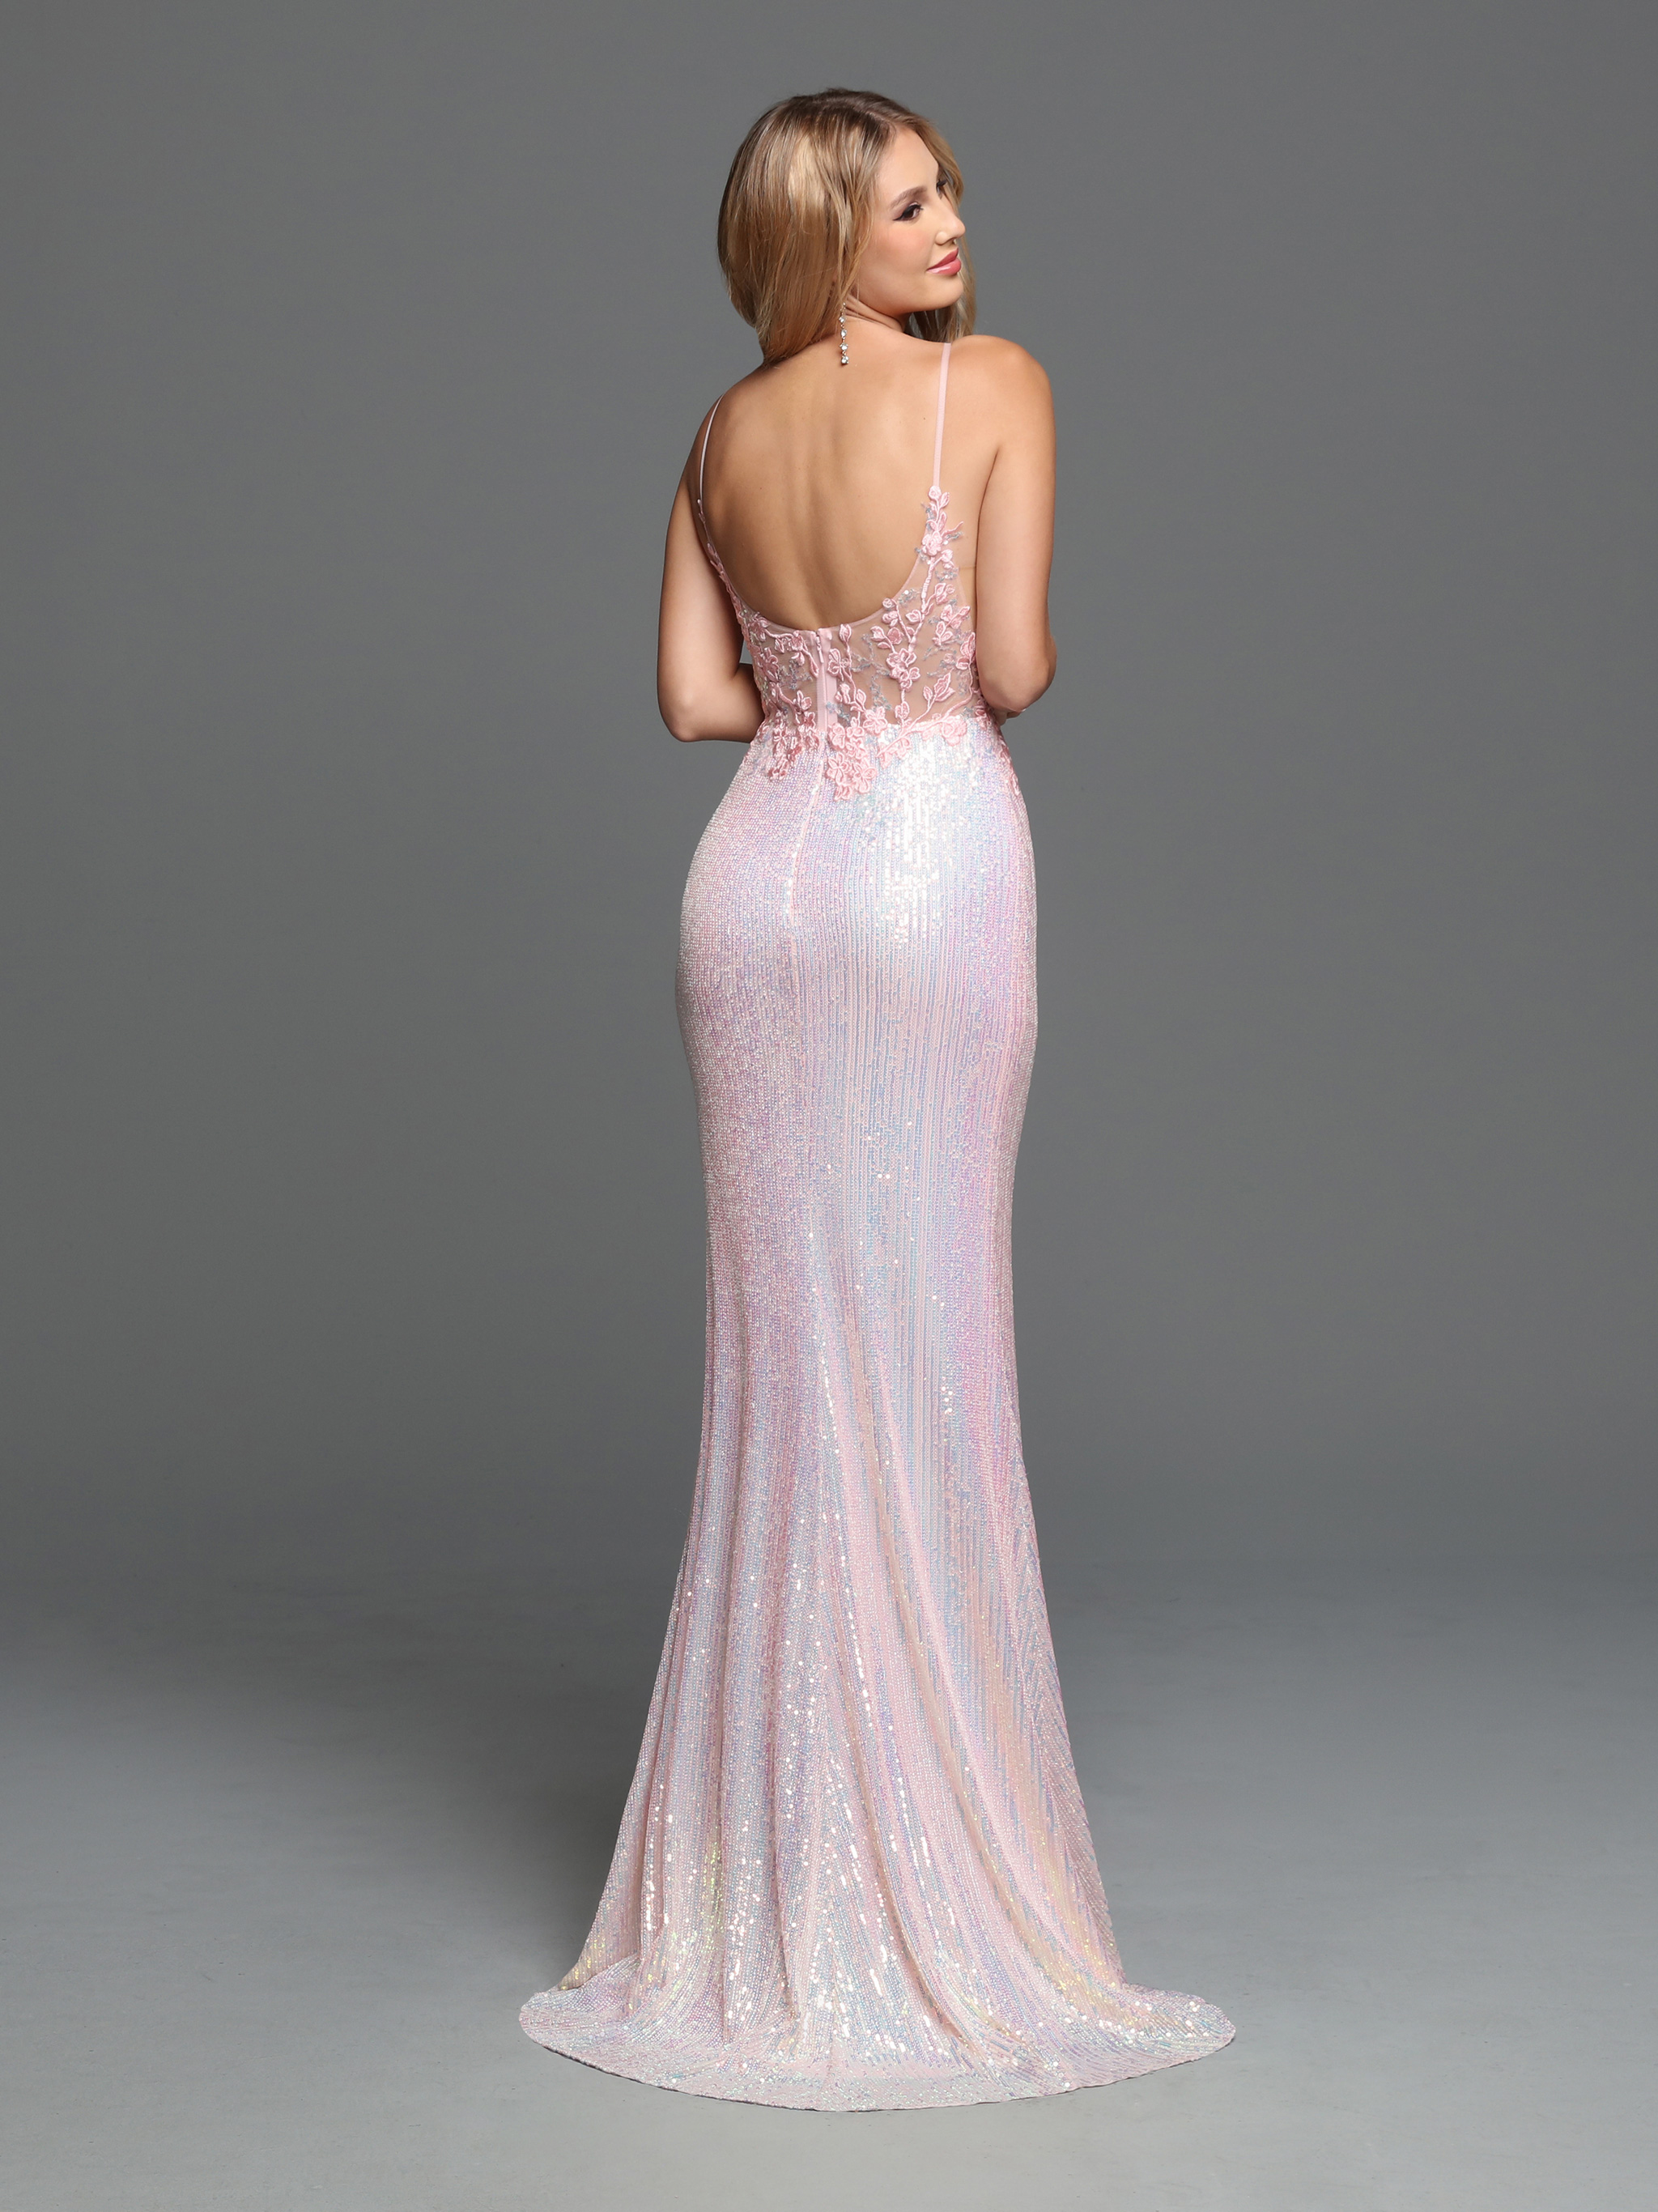 Image showing back view of style #72268